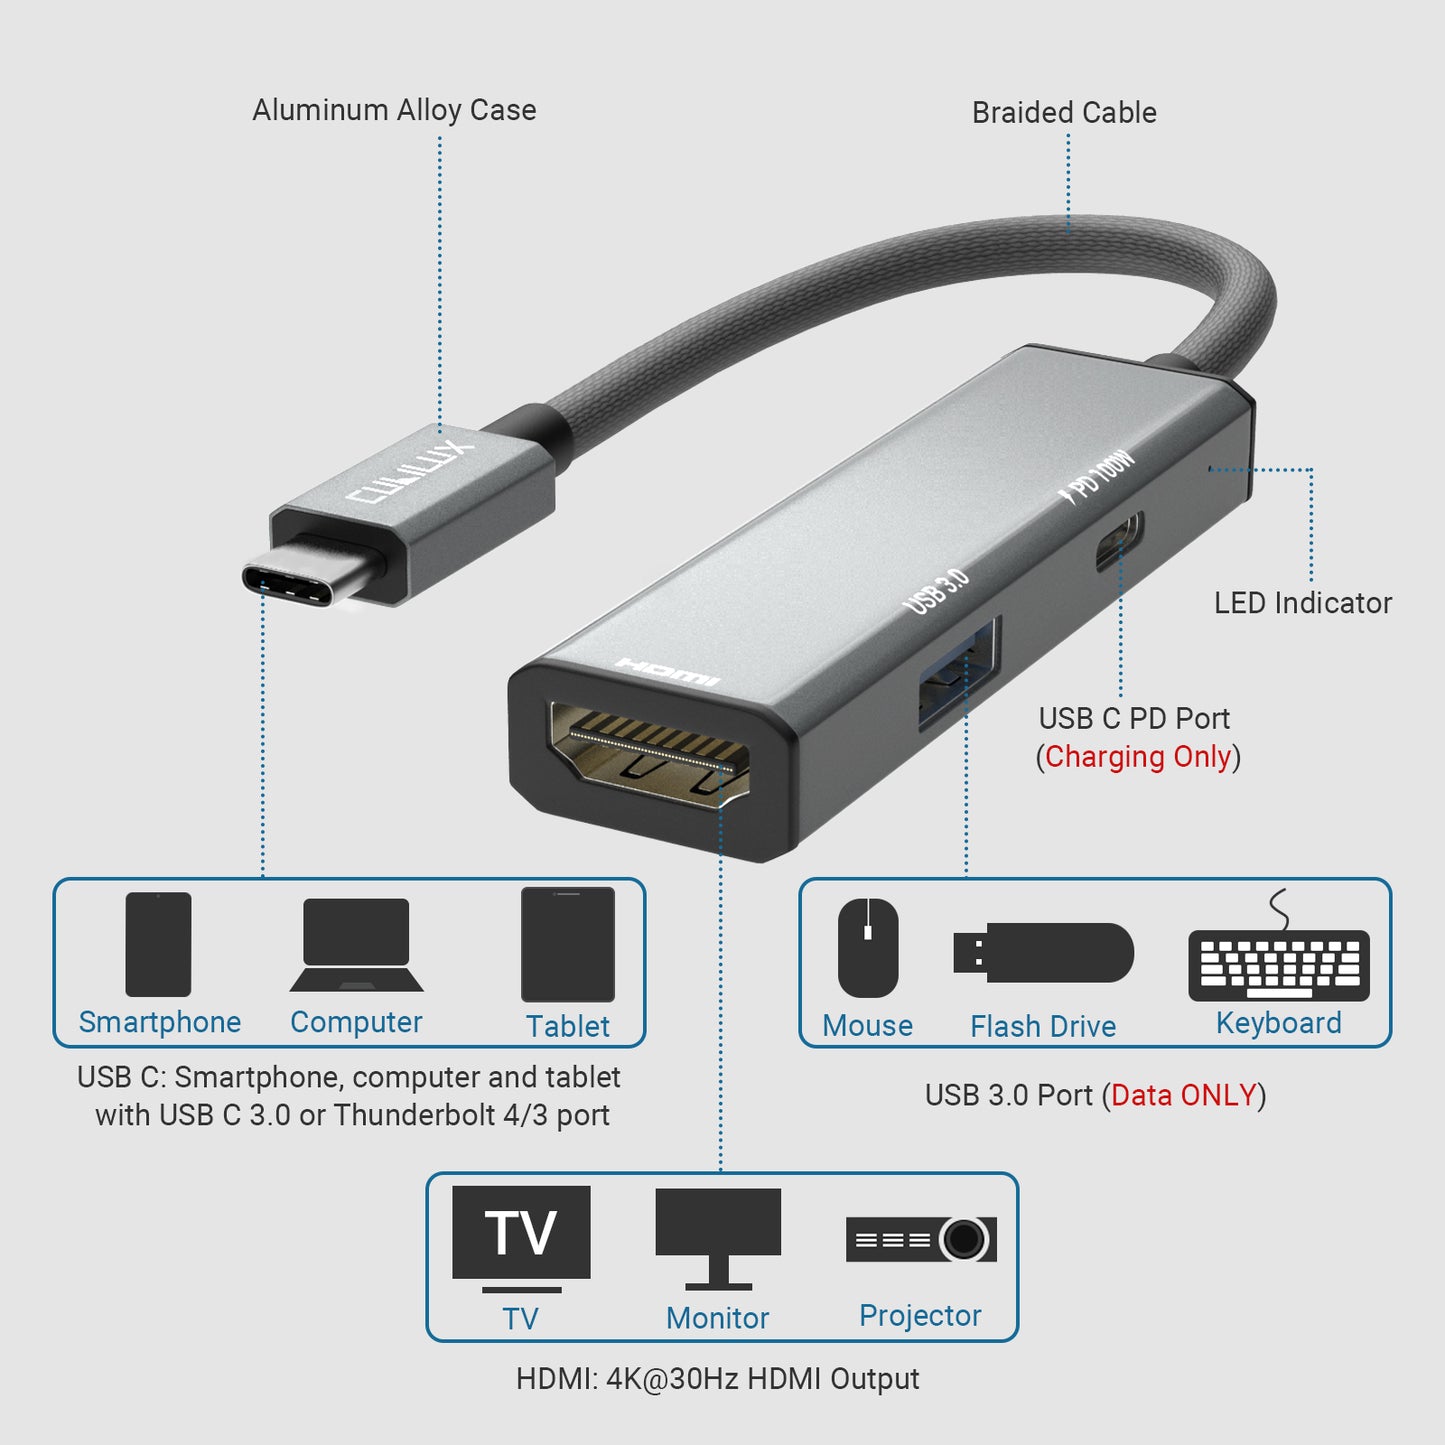 3-In-1 USB C to 4K HDMI Adapter with USB 3.0